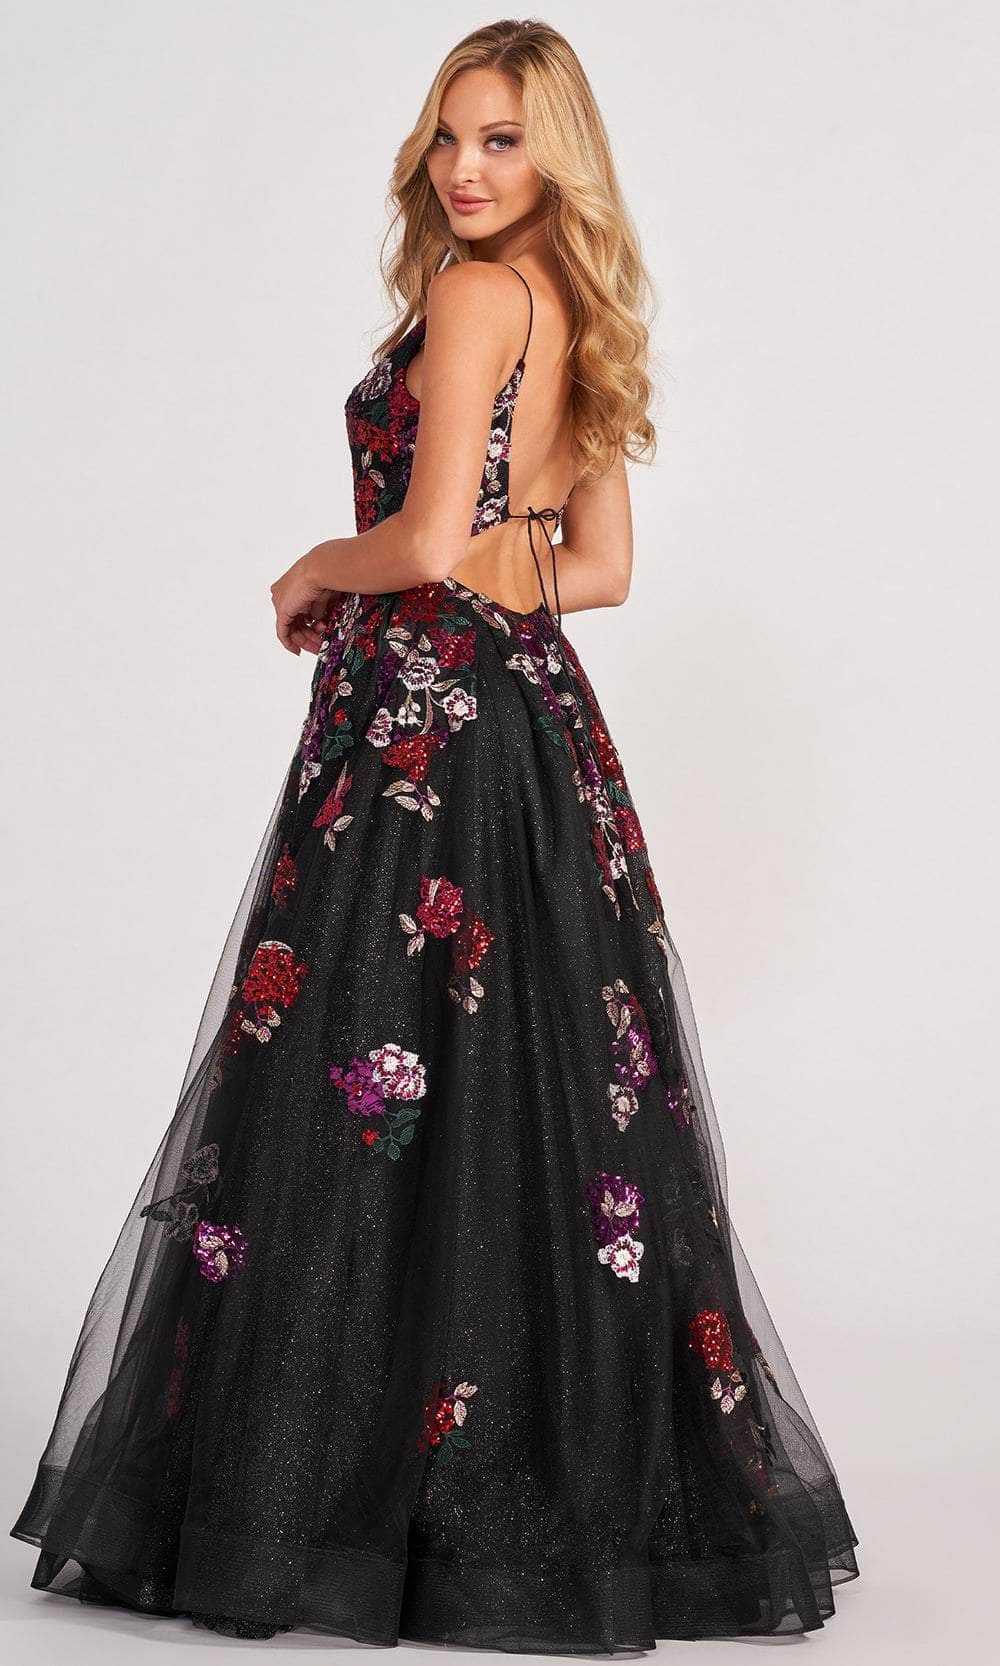 Colette for Mon Cheri, Colette for Mon Cheri CL2069 - Glittery Embroidered Plus Size Prom Dress